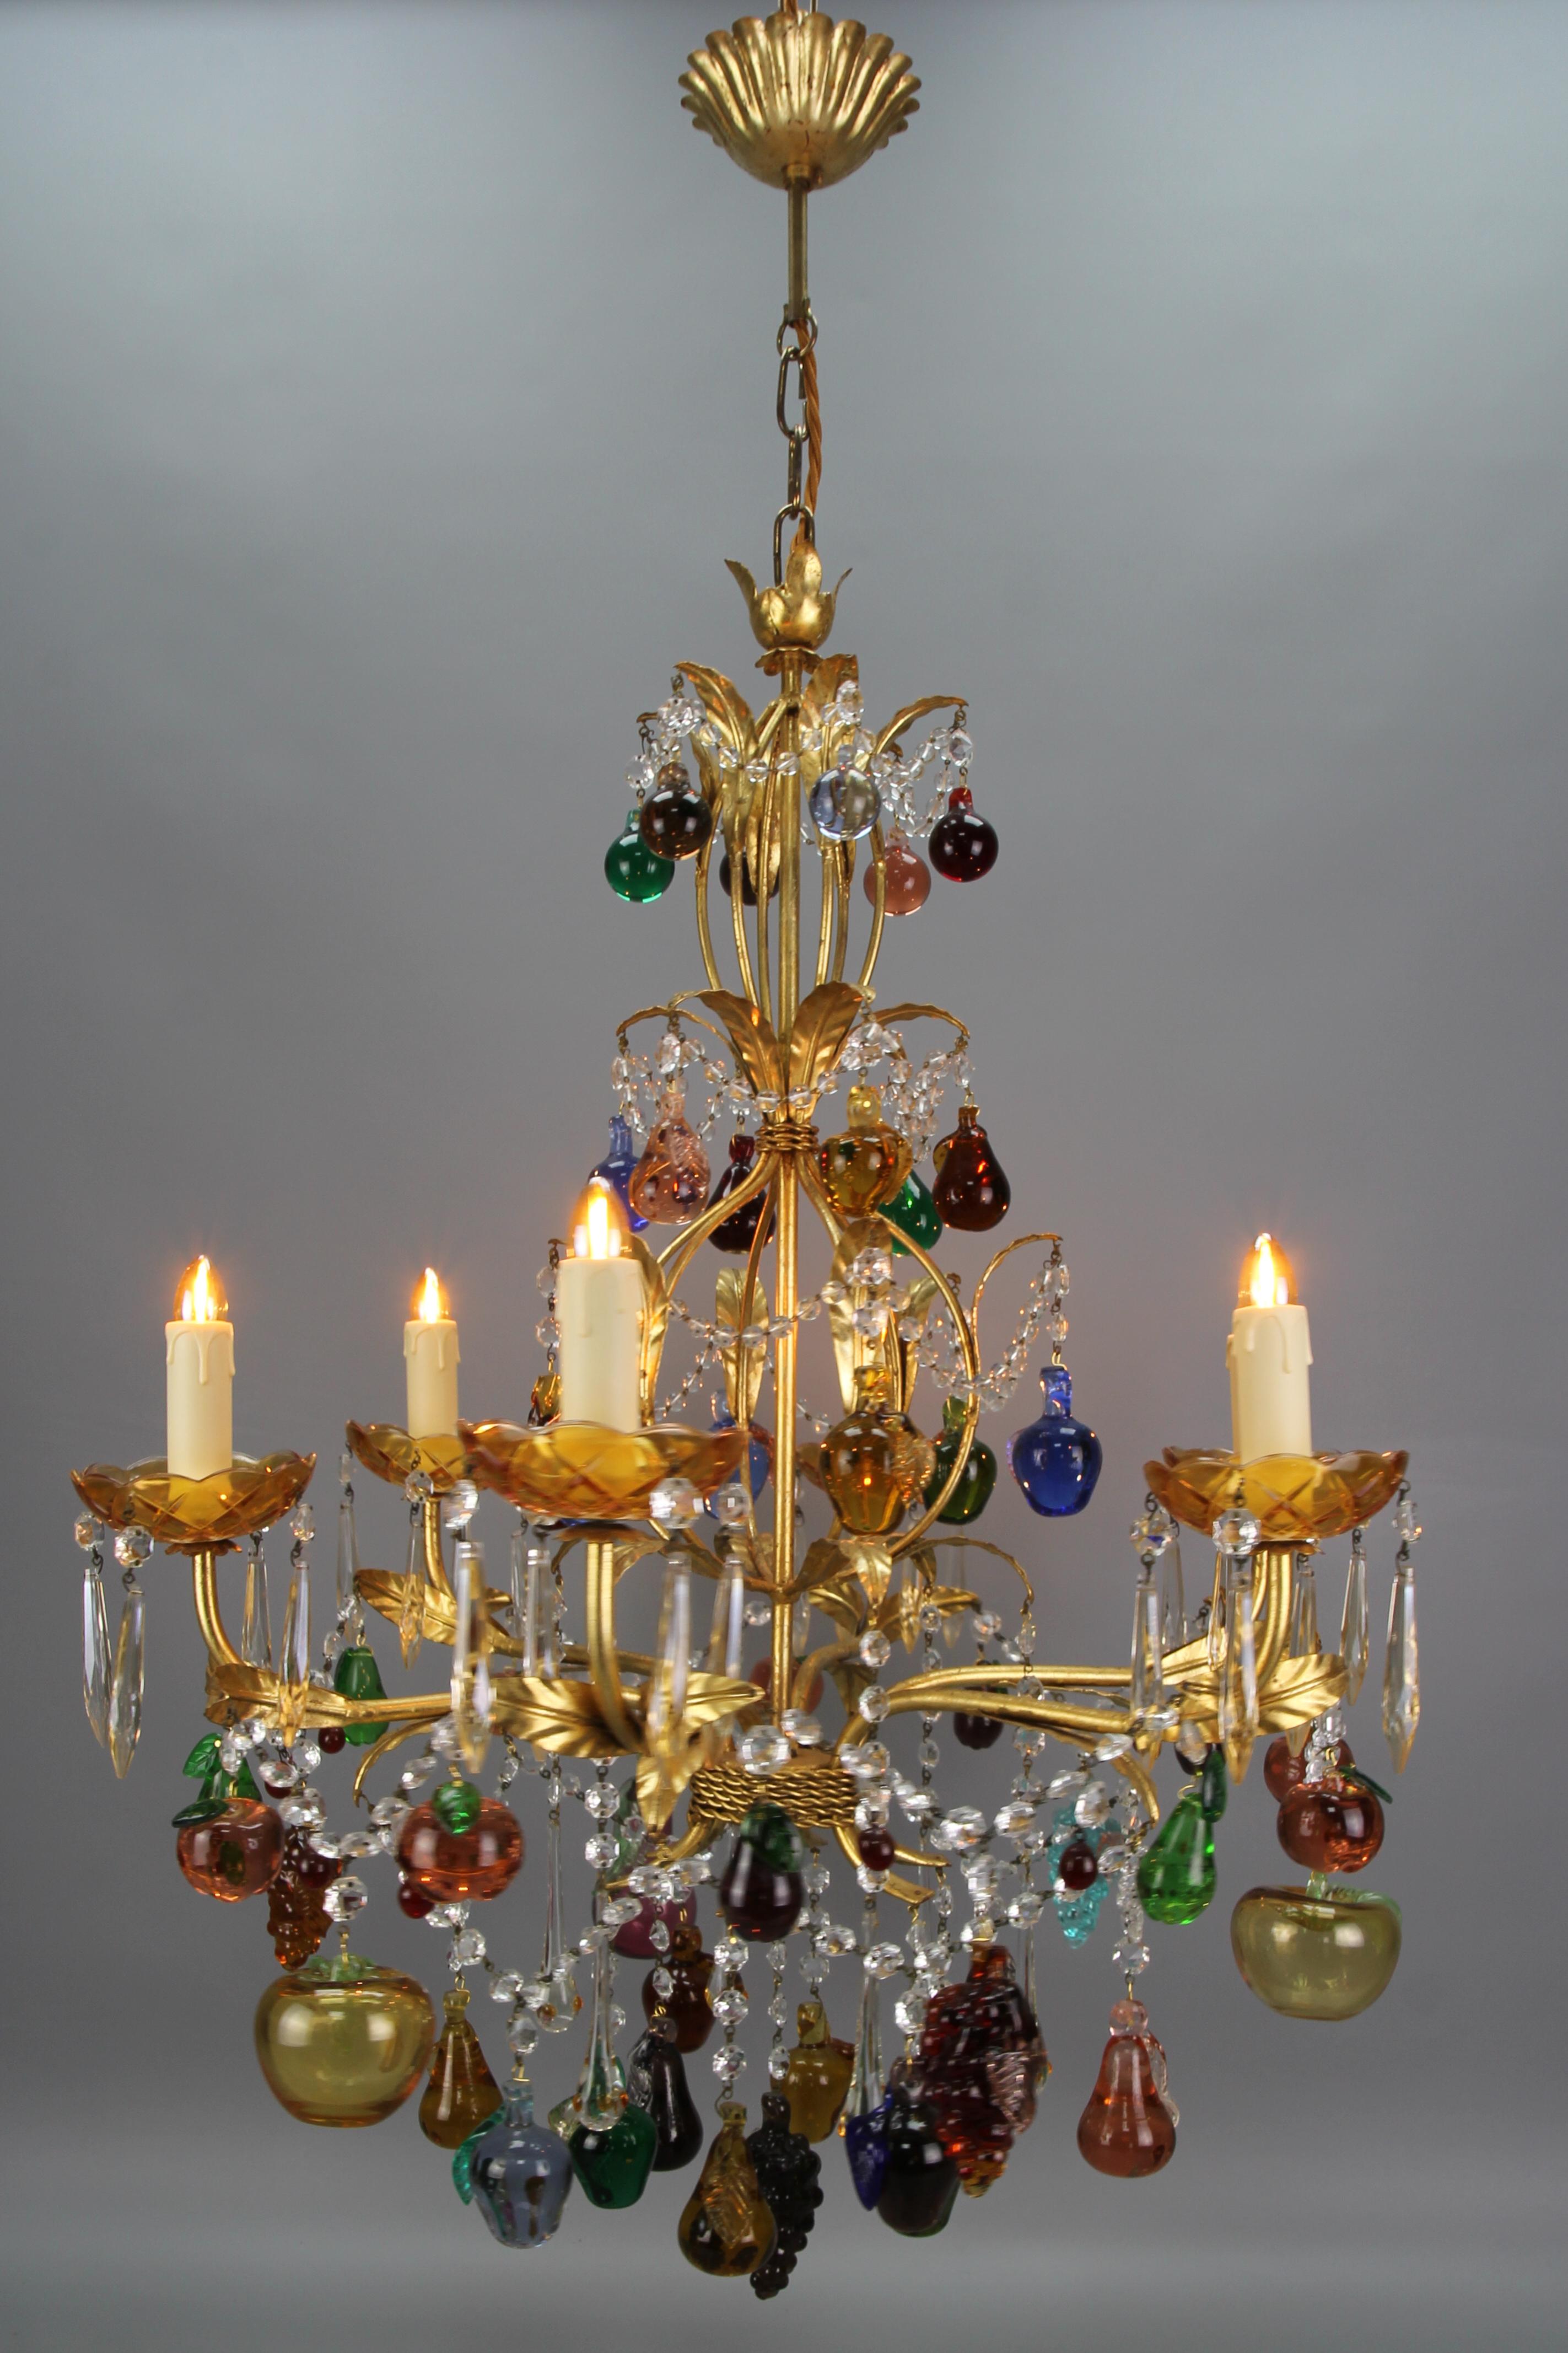 Italian Venetian gilt metal 6-light chandelier with Murano glass fruits and berries from the late 20th Century.
This impressive and beautiful Italian Hollywood Regency-style gilt metal chandelier features six chandelier arms adorned with